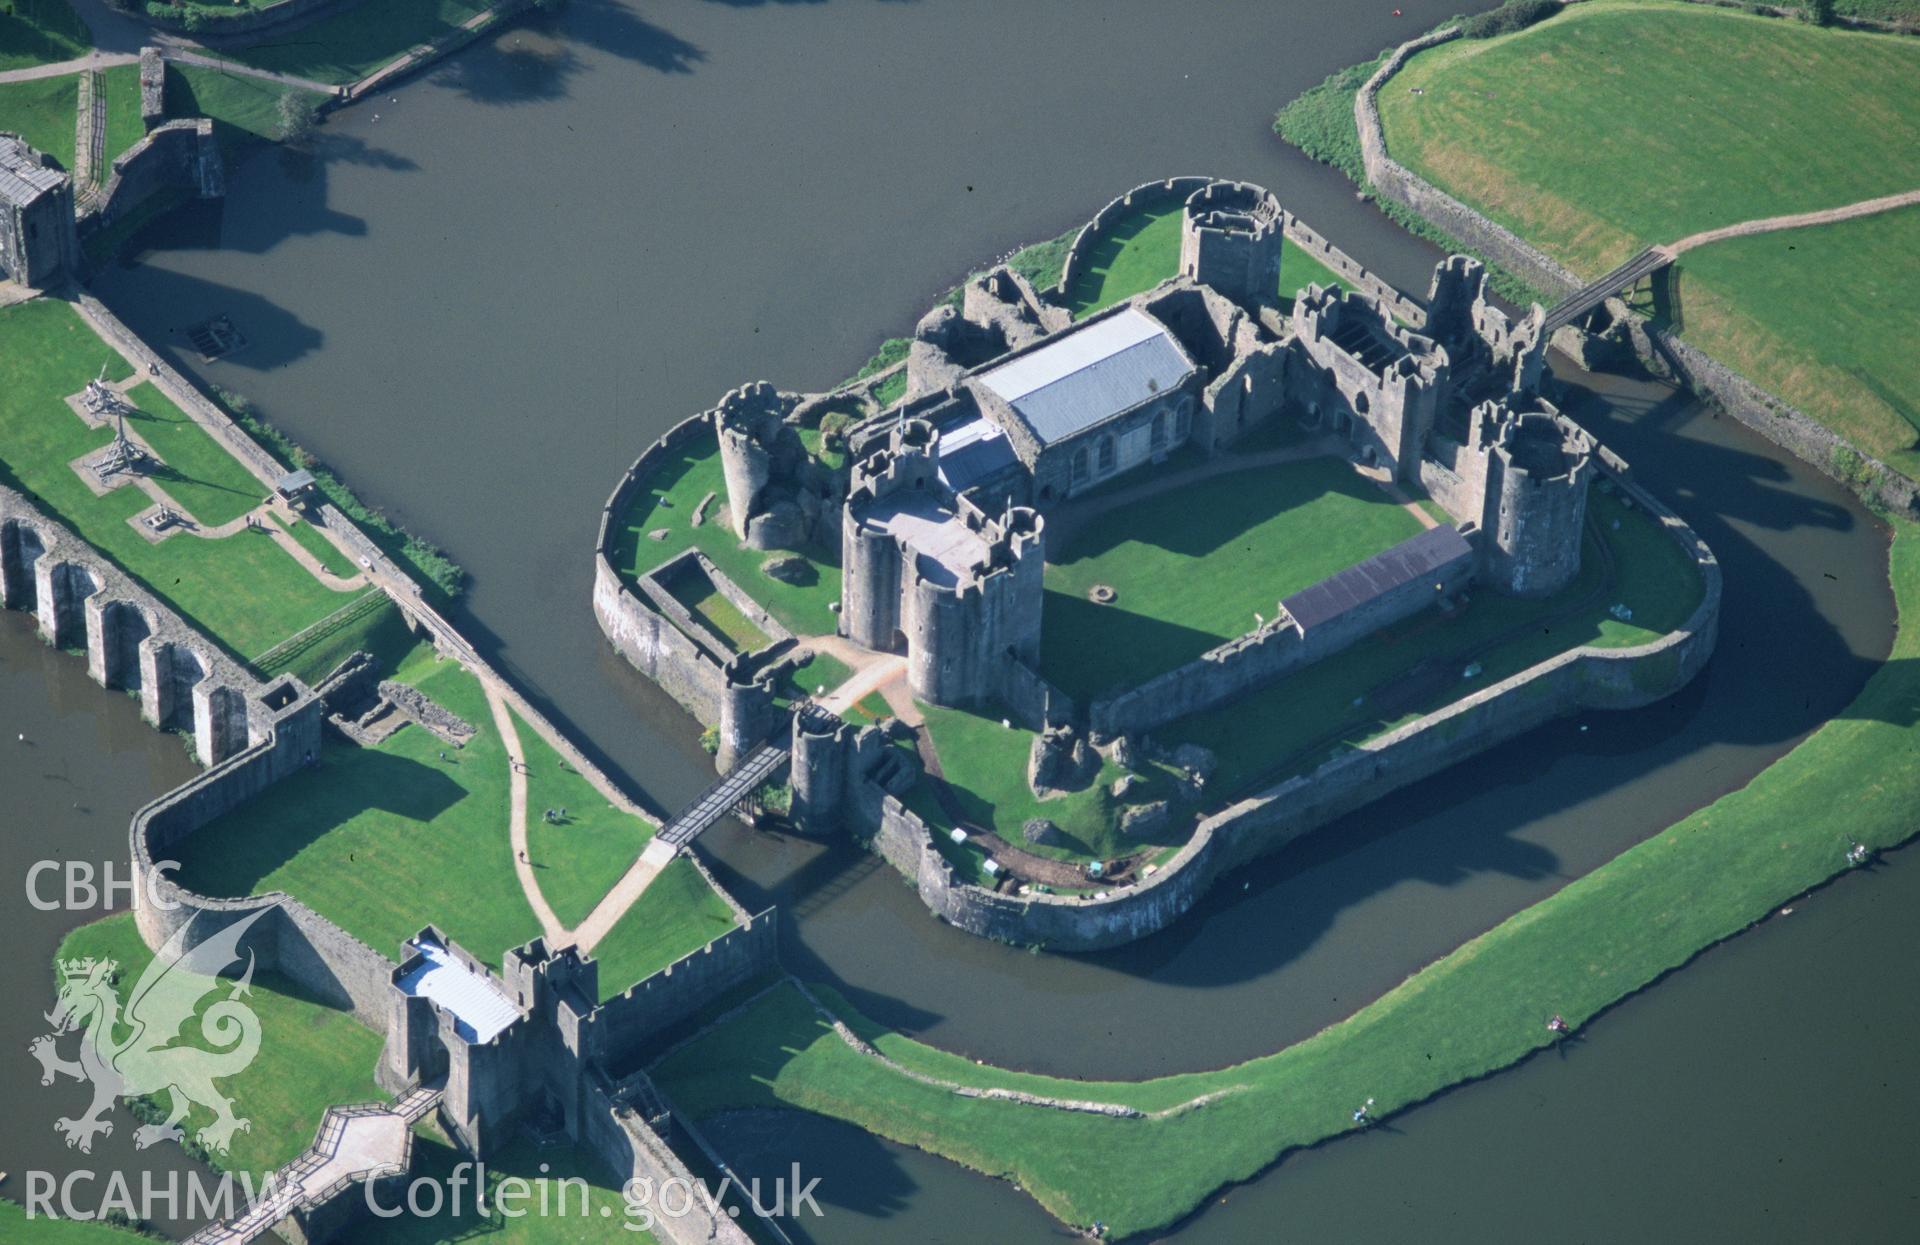 Slide of RCAHMW colour oblique aerial photograph of Caerphilly Castle, taken by T.G. Driver, 13/10/1999.